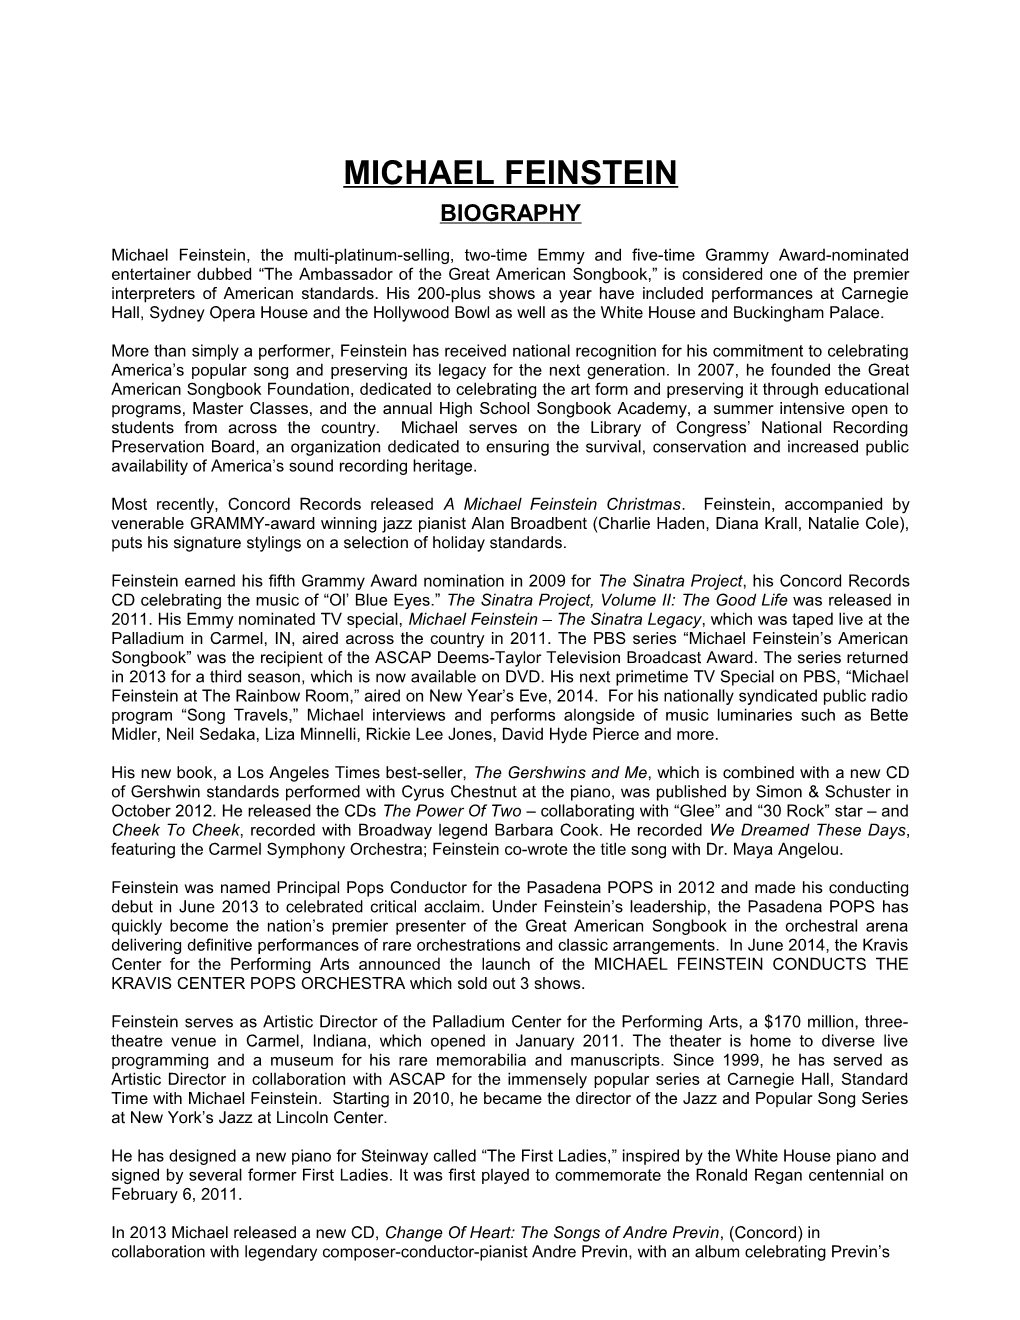 Michael Feinstein, the Multi-Platinum-Selling, Five-Time Grammy-Nominated Entertainer Dubbed